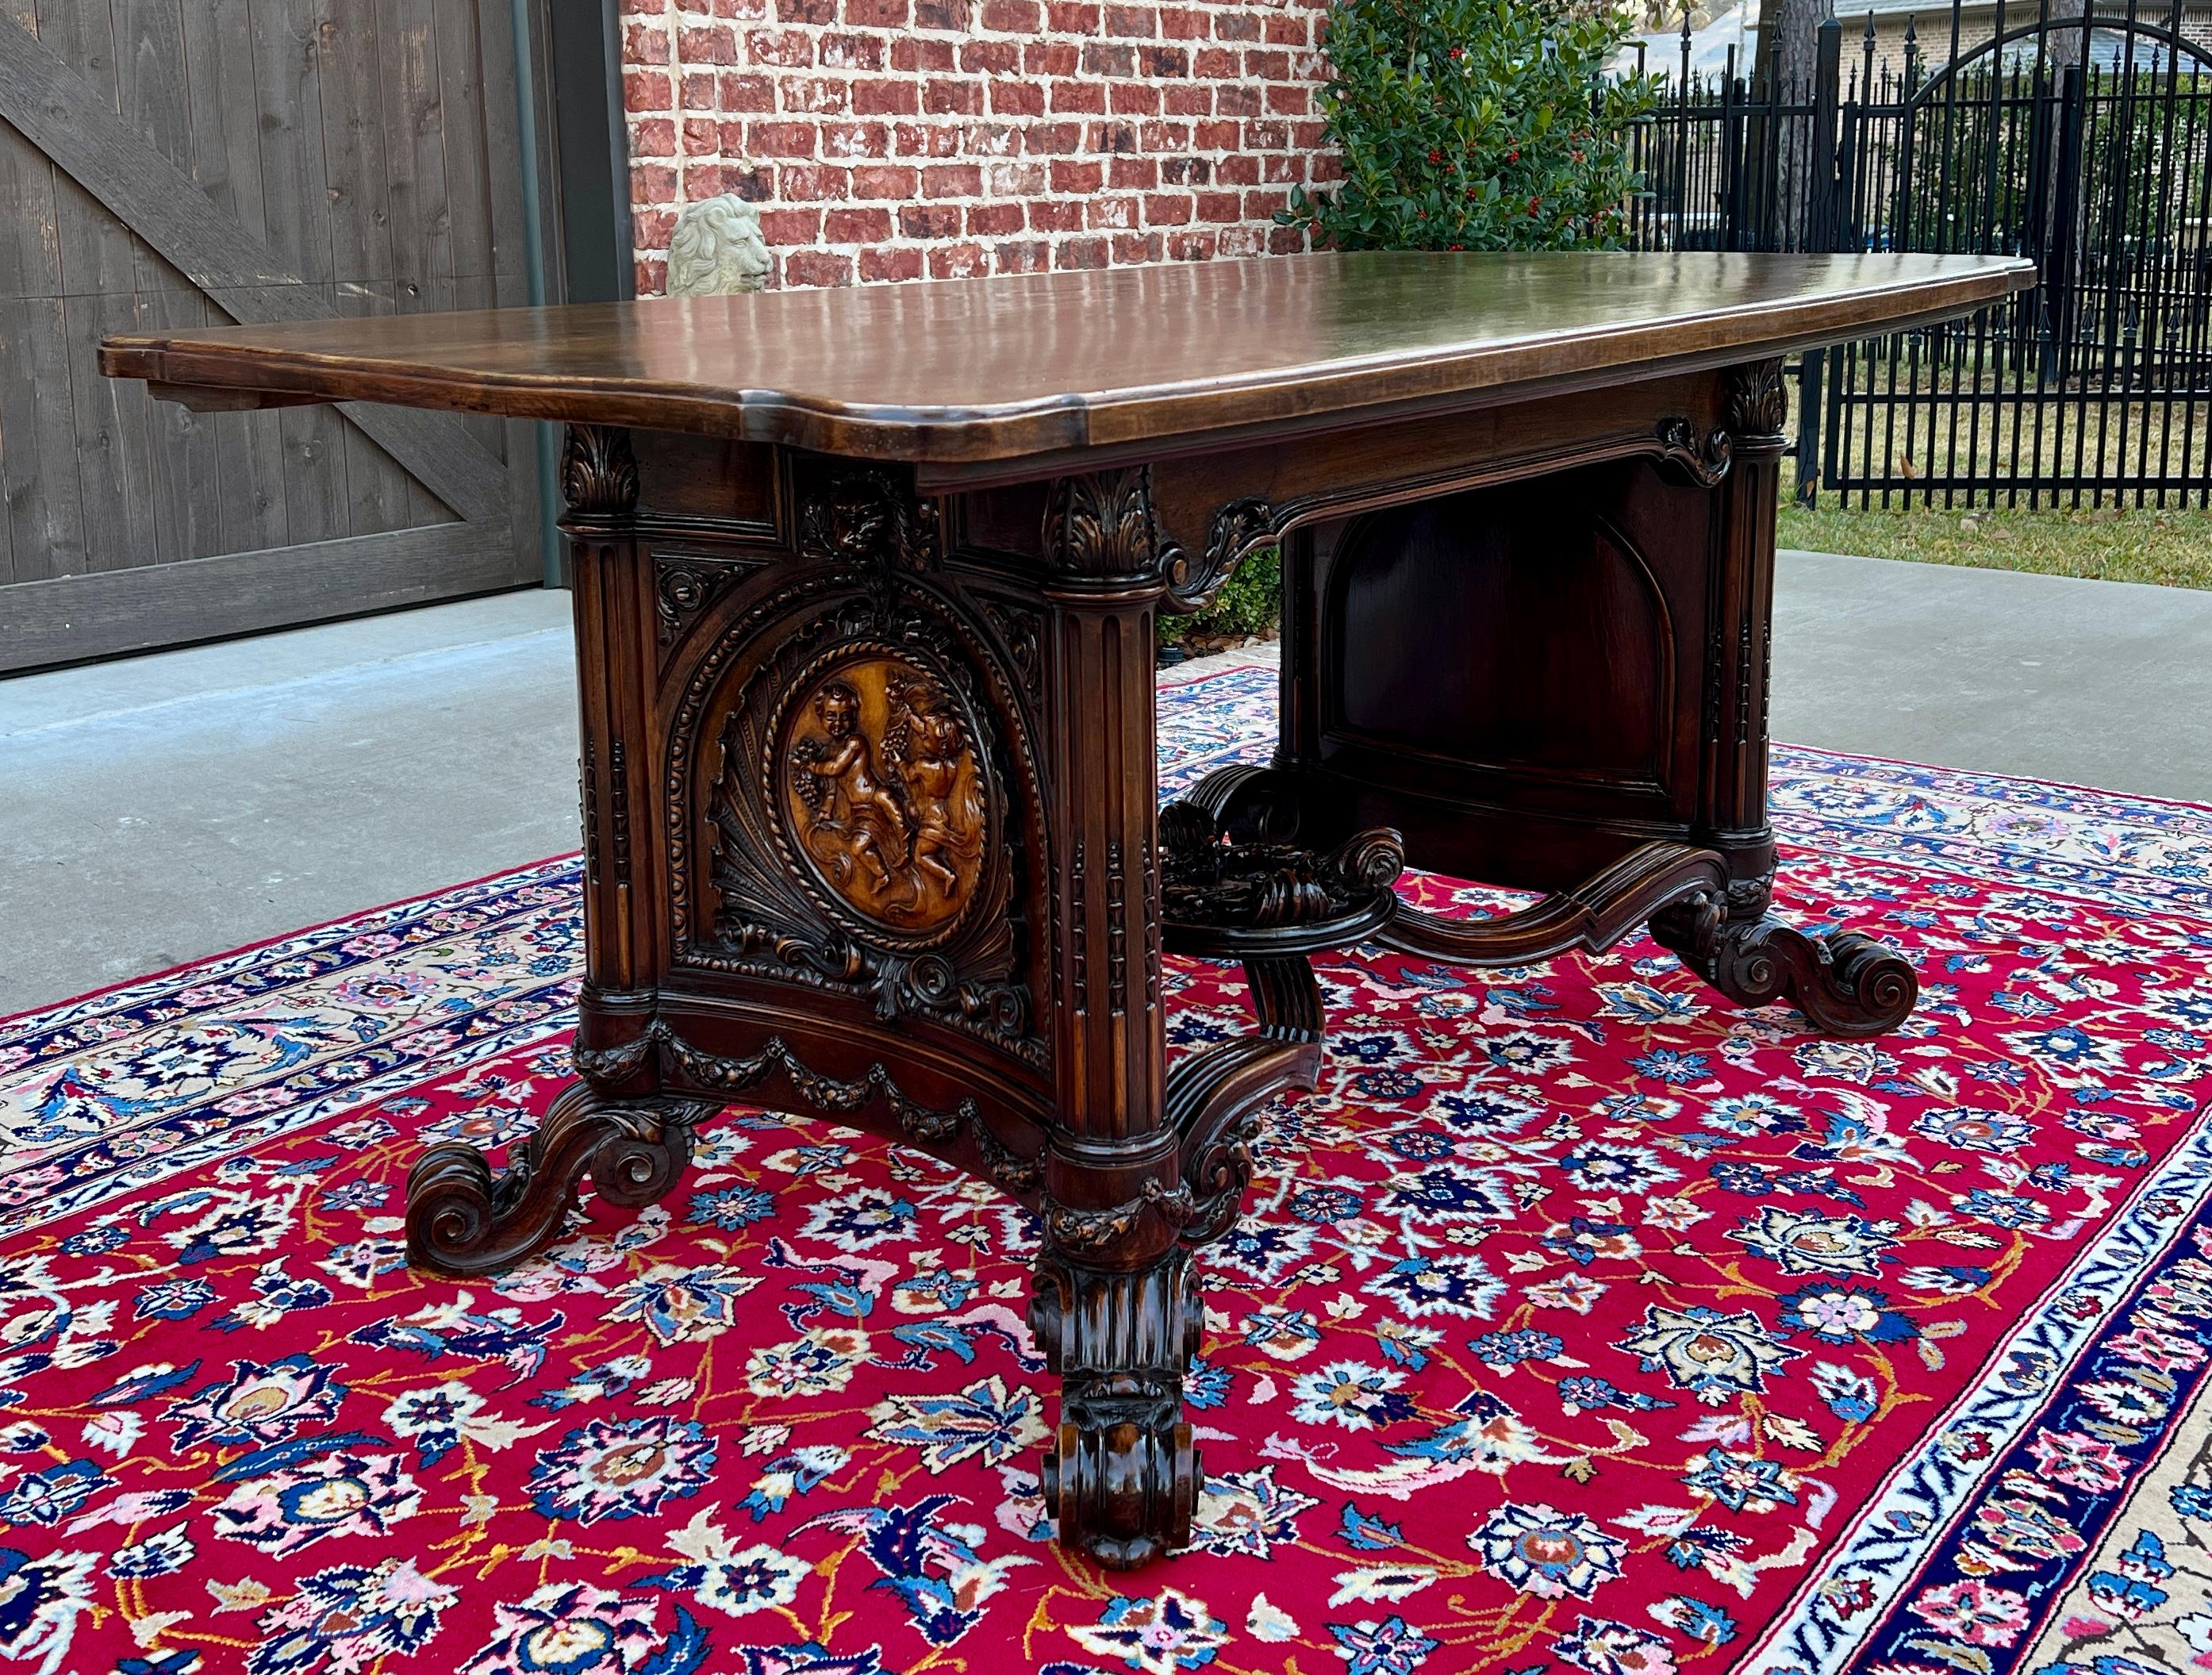 SUPERB Antique French Renaissance Revival Oak Breakfast Dining Table or Writing Desk ~~HIGHLY CARVED~~Cherubs~~

This table is a true 